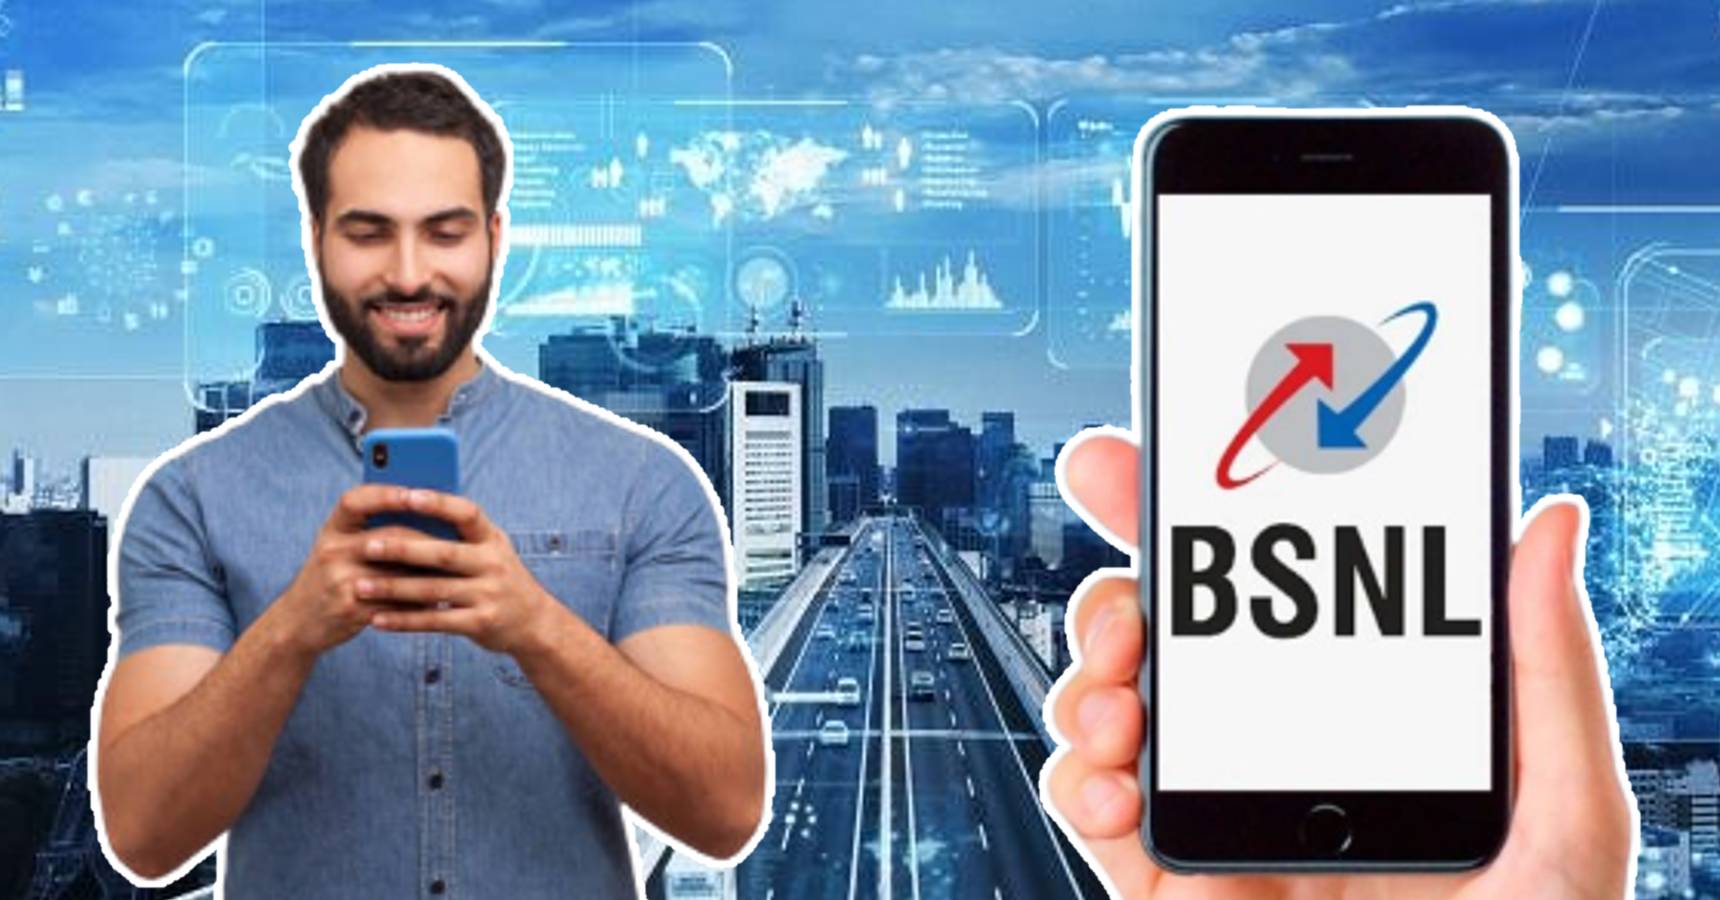 Get unlimited calling for 65 days through this BSNL plan